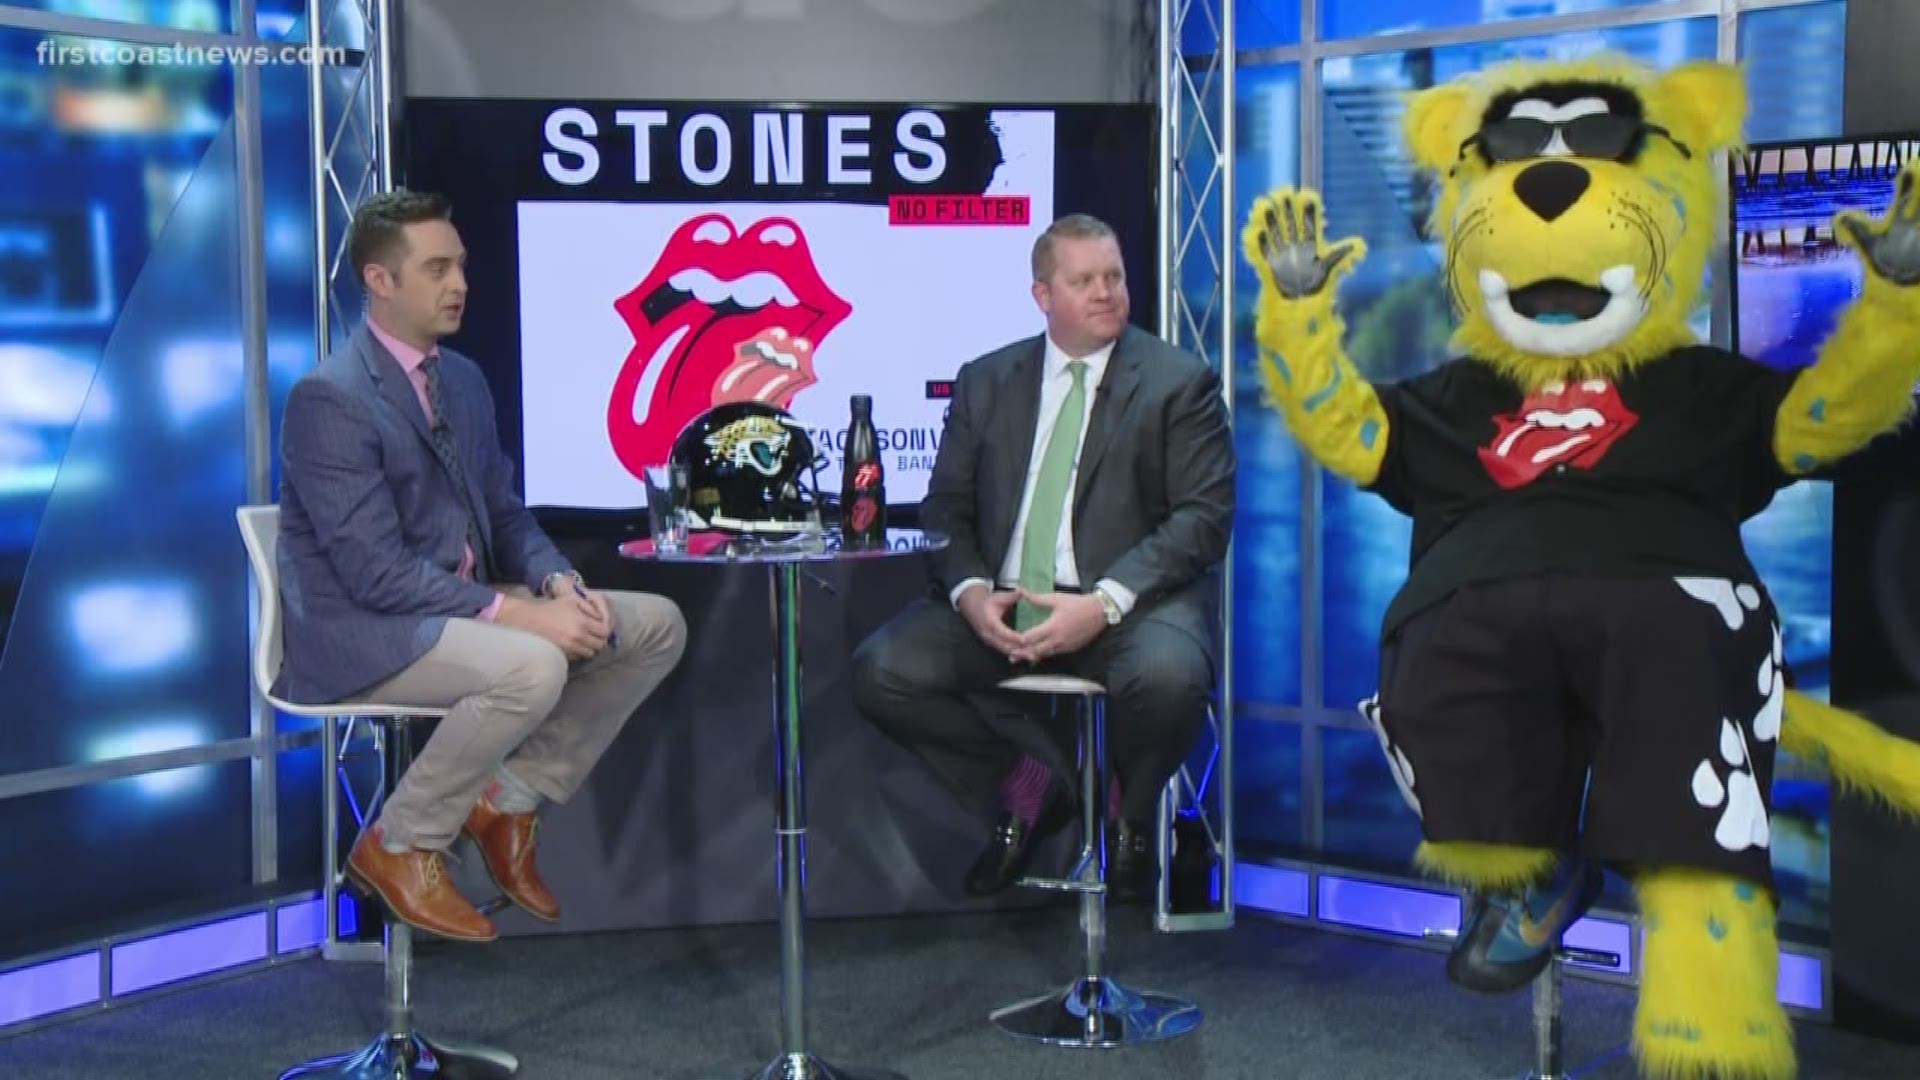 Jaxon deVille stopped at First Coast News to talk the Rolling Stones. Tickets go on sale Friday at 10 p.m. at Ticketmaster. They expect to sell out the day it goes on sale.